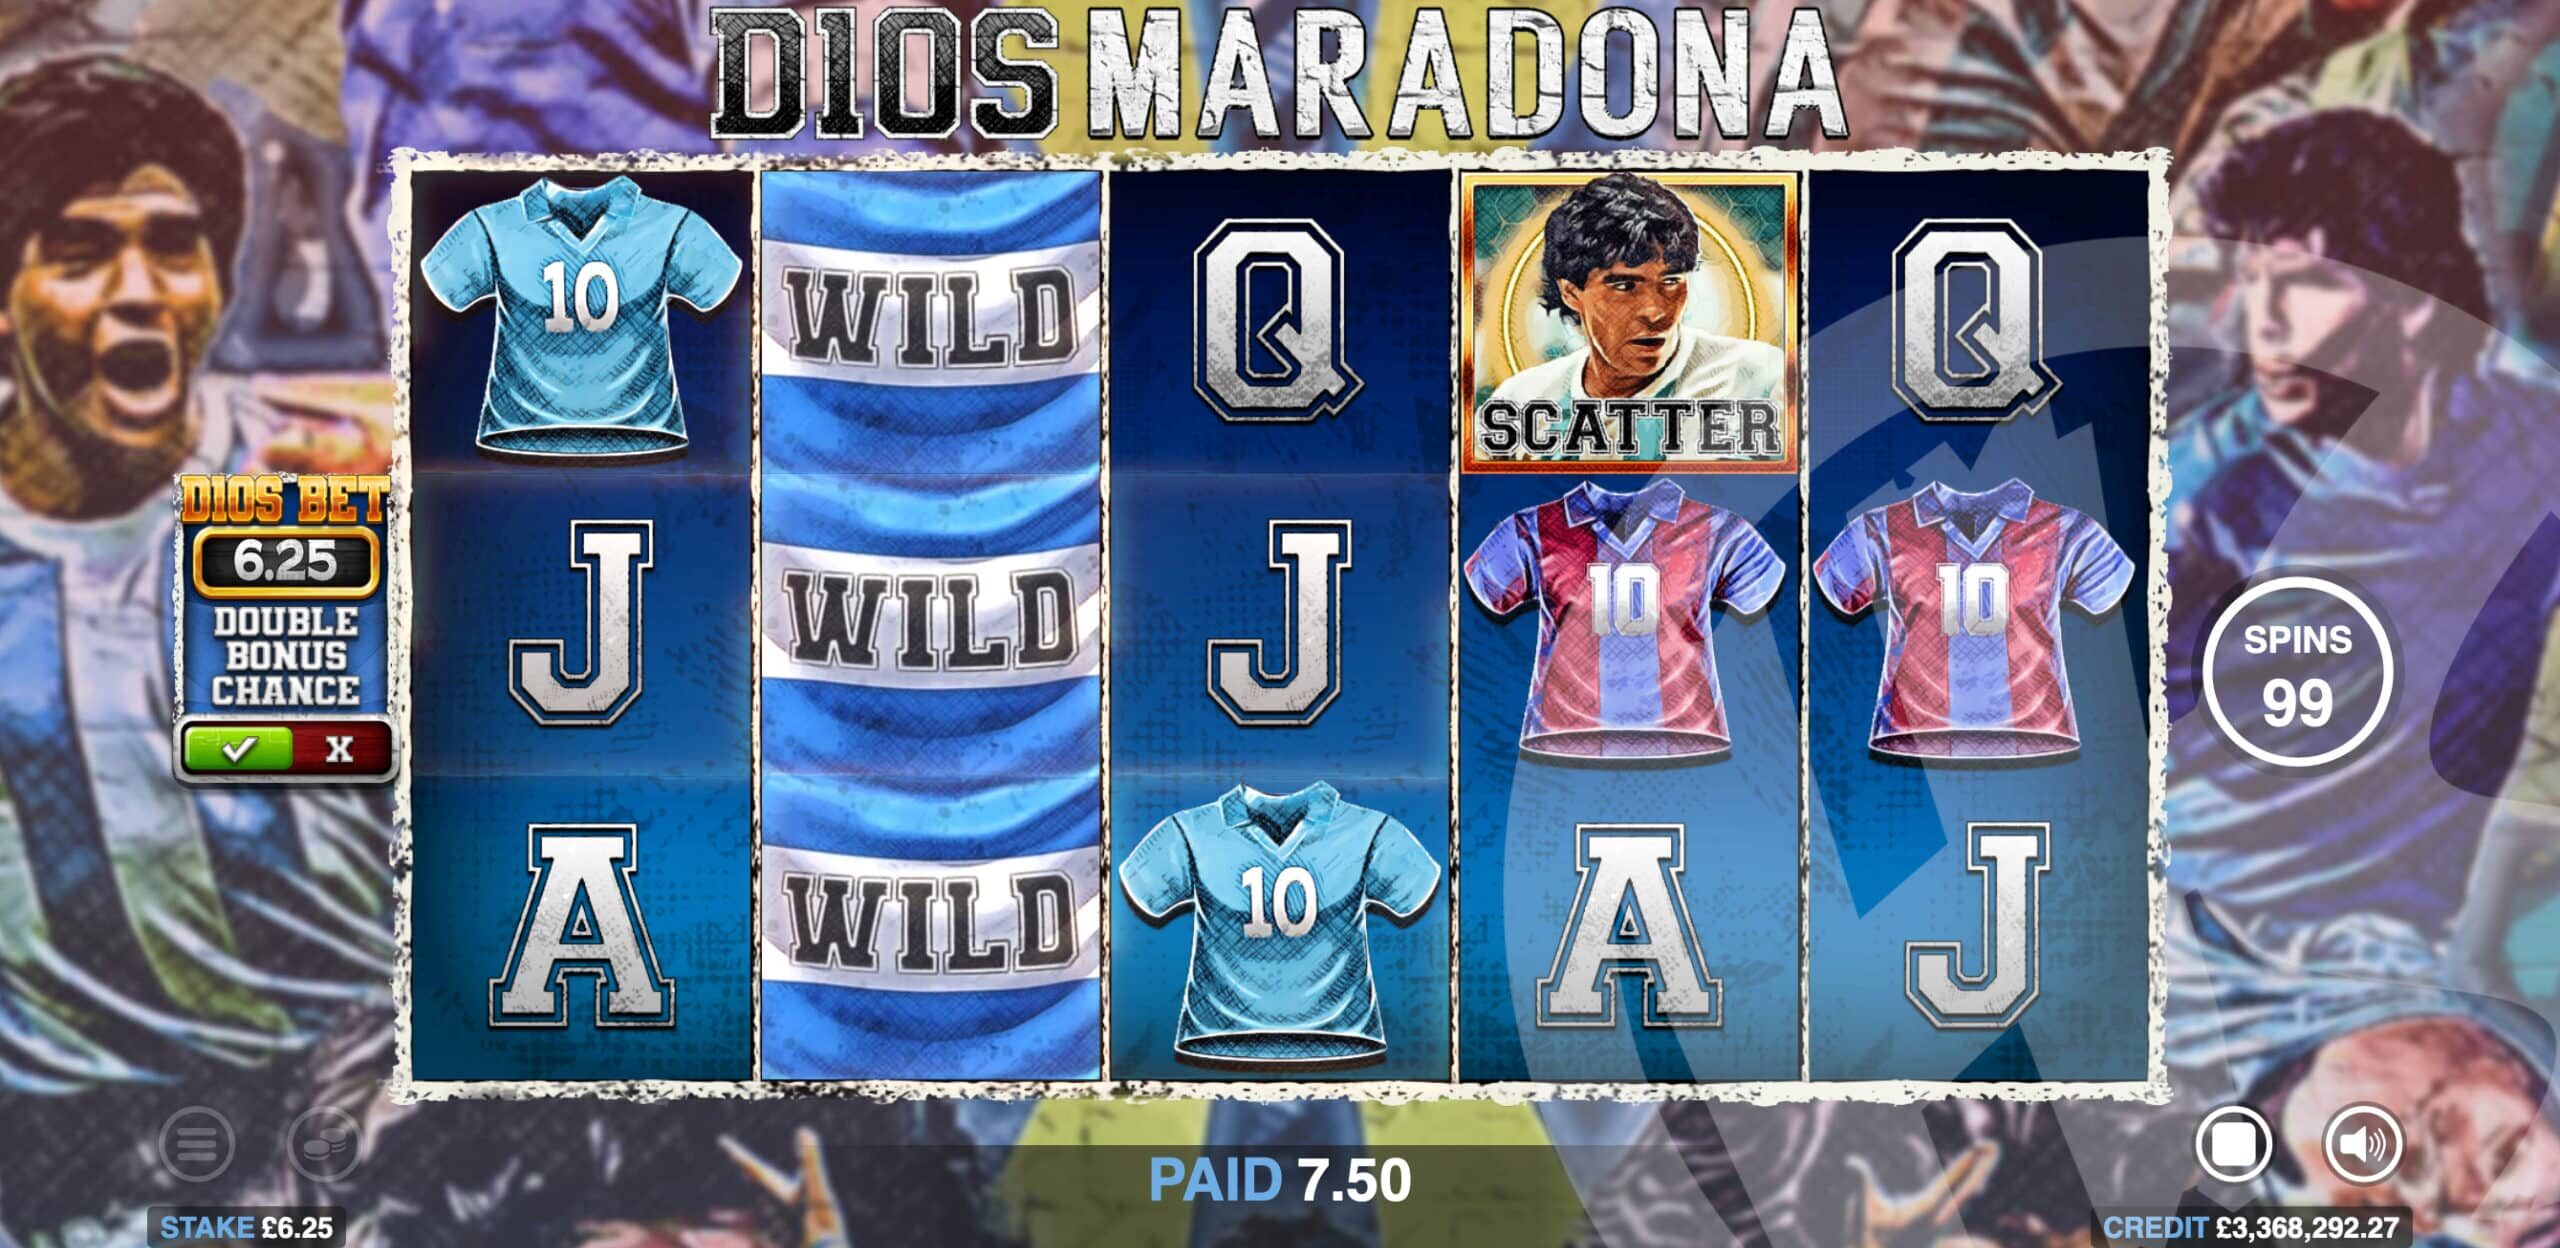 D10S Maradona Offers Players 20 Fixed Win Lines